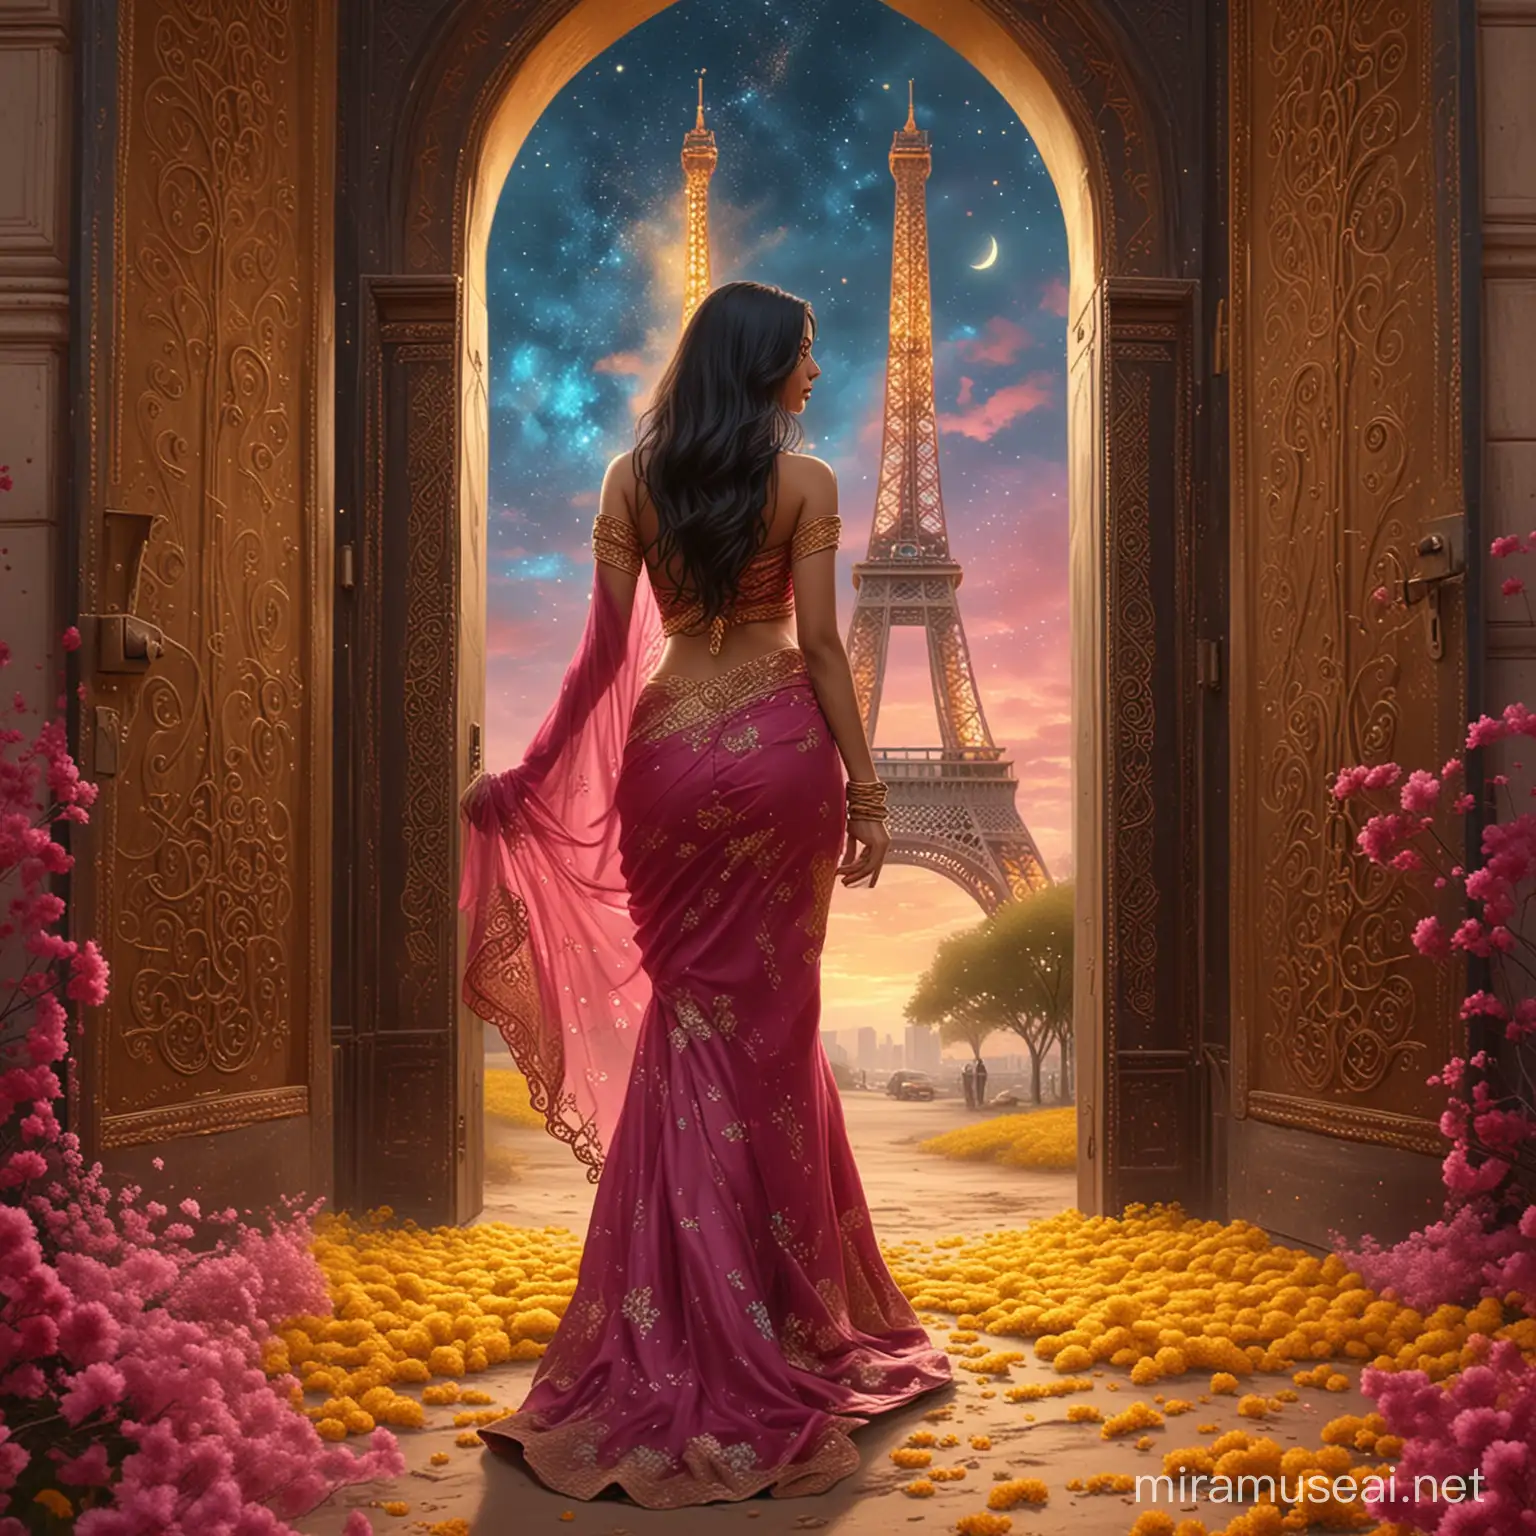 A beautiful woman, from behind, walking to an opened golden arabian door, surrounded by dark yellow flowers and dark pink dust. Long wavy black hair. Elegant long dark red and blue sari dress, haute couture, sari tissu. Background a dark pink sky with nebula. Background floral tower eiffel. Focus the huge golden arabian door. 8k, fantasy, illustration, digital art, illustration art, fantasy art, fantasy style